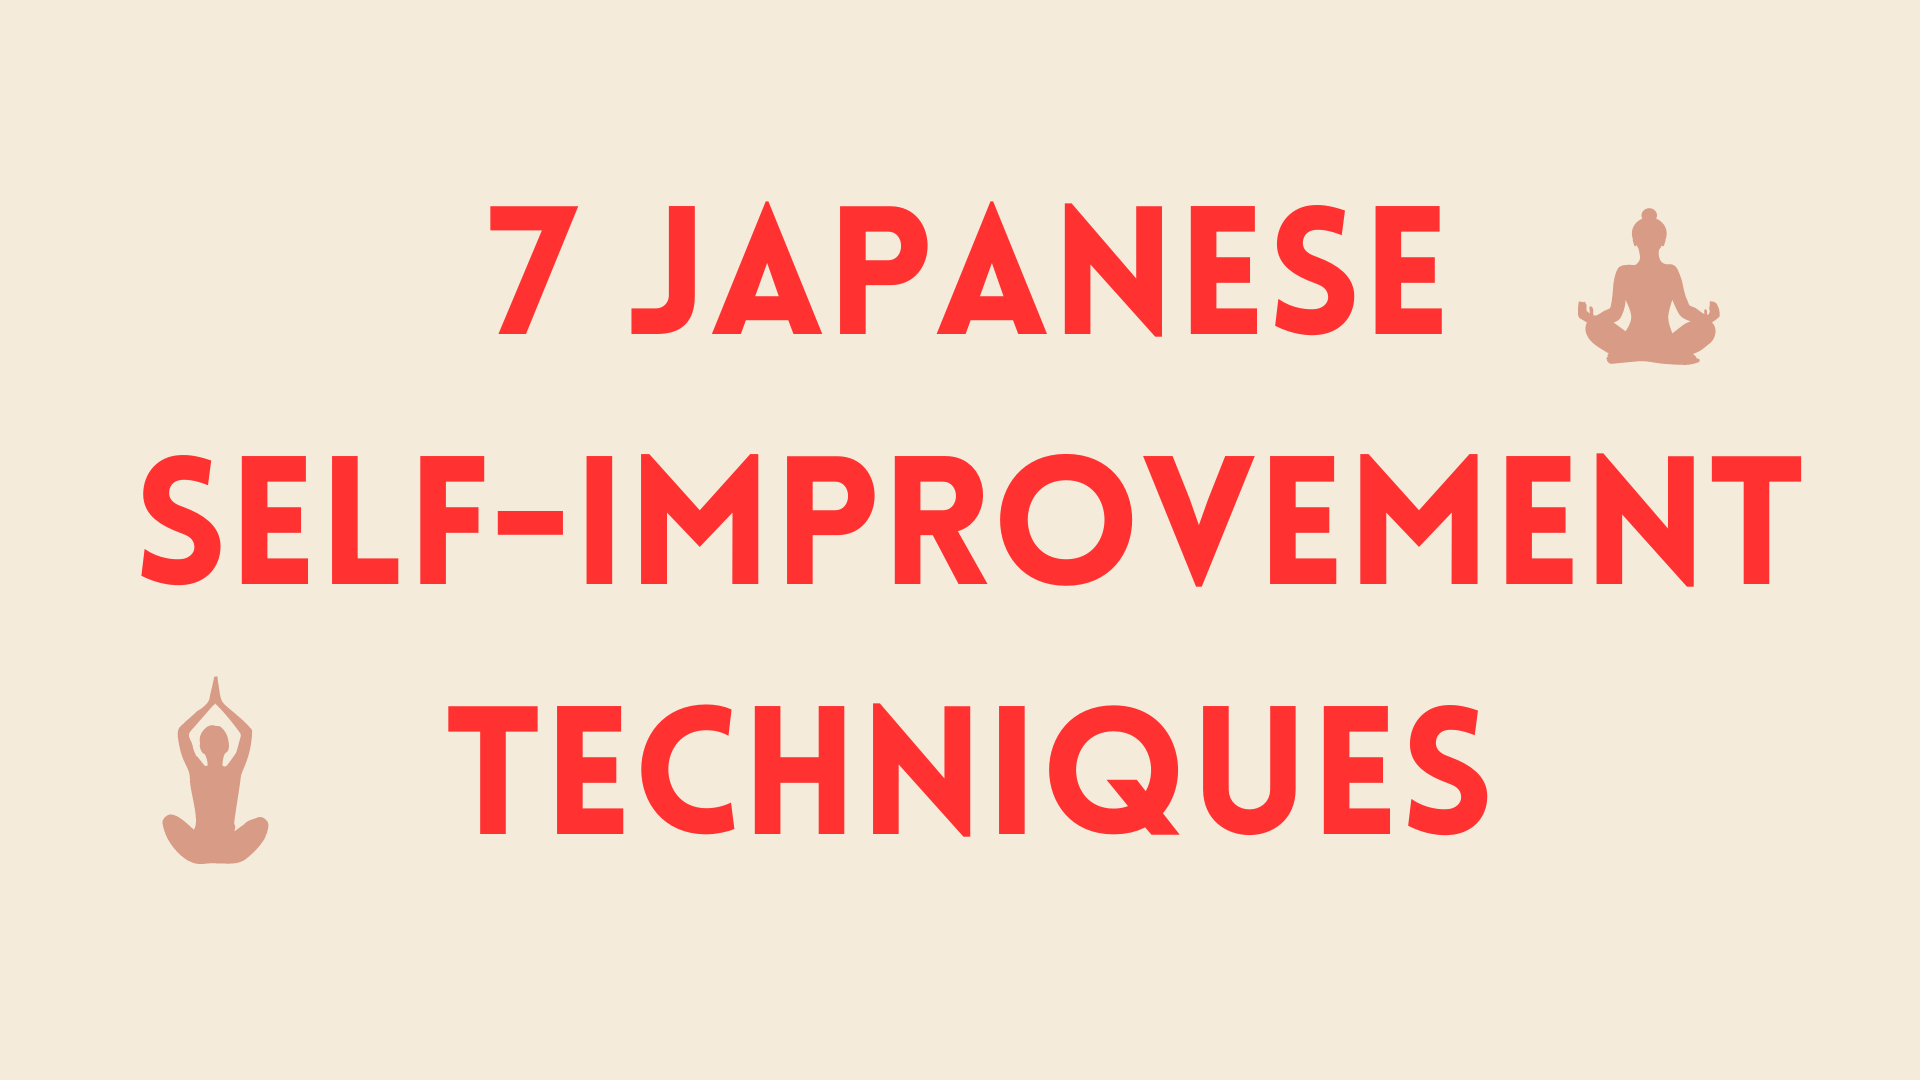 7 Japanese self-improvement techniques to transform your life